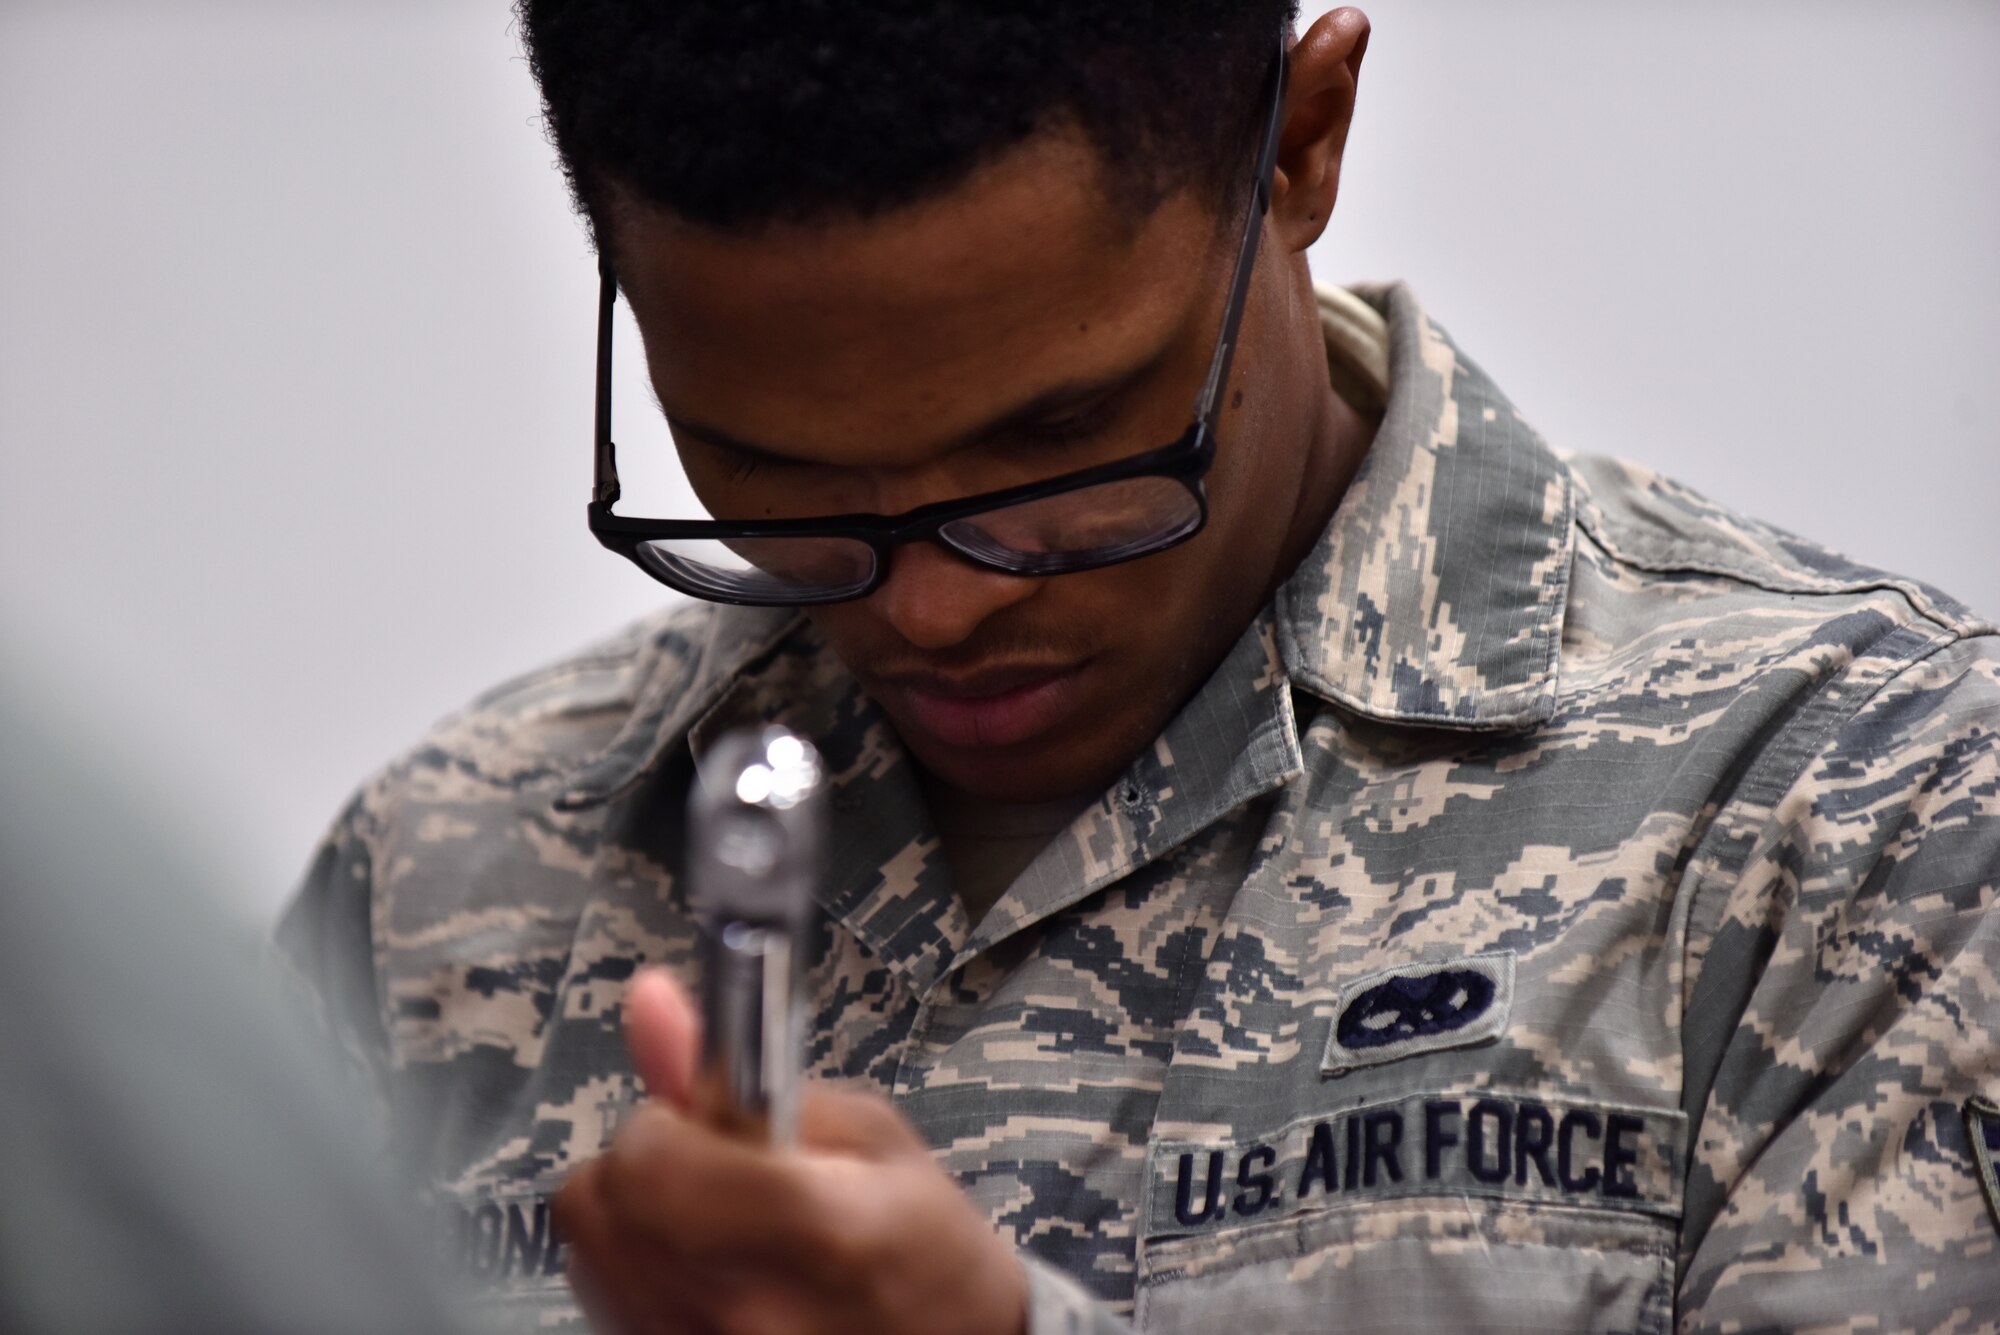 U.S. Air Force Senior Airman Stephen Jones, a composite tool kit technician assigned to the 509th Aircraft Maintenance Squadron, inspects a took before check out in one of the supply buildings at Whiteman Air Force Base, Mo., April 10, 2018. Each tool must have the correct labels and be free of discrepancies before being issuing out to a crew chief for maintenance. (U.S. Air Force photo by Senior Airman Jovan Banks)